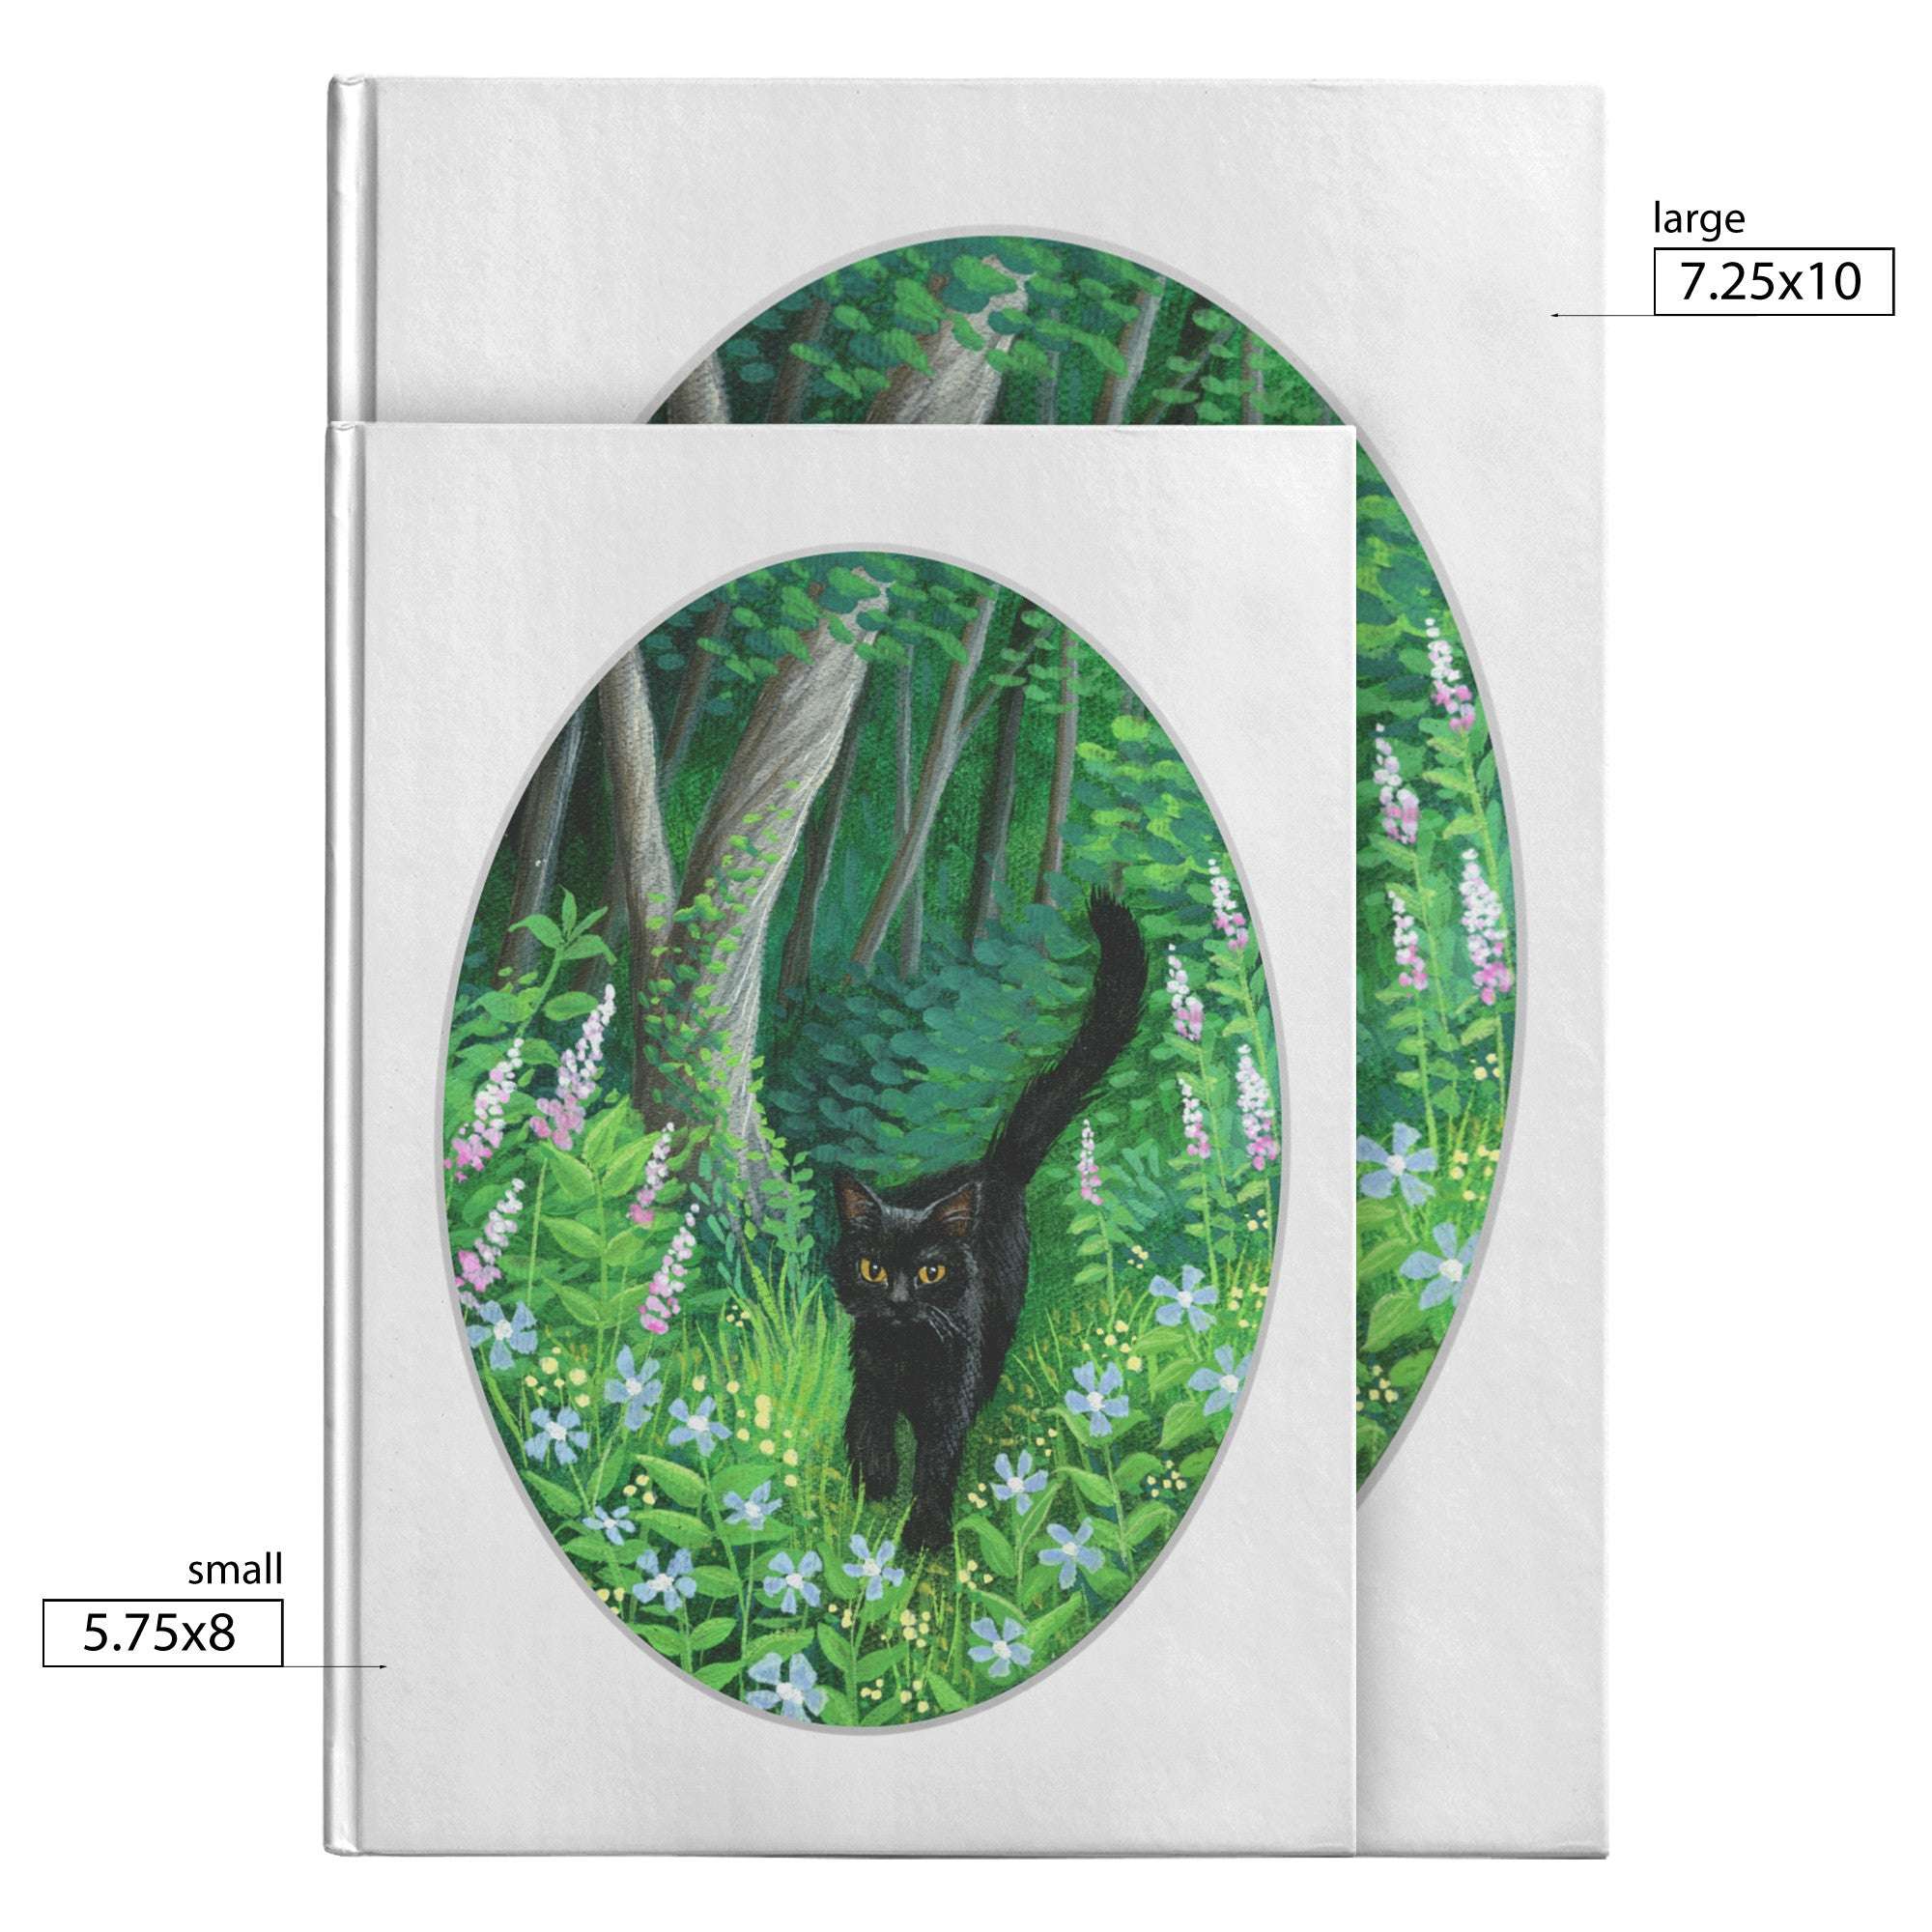 Whiskered Welcome Journal with two sizes shown, featuring a cover illustration of a black cat walking through a lush, green forest with blue and pink flowers.